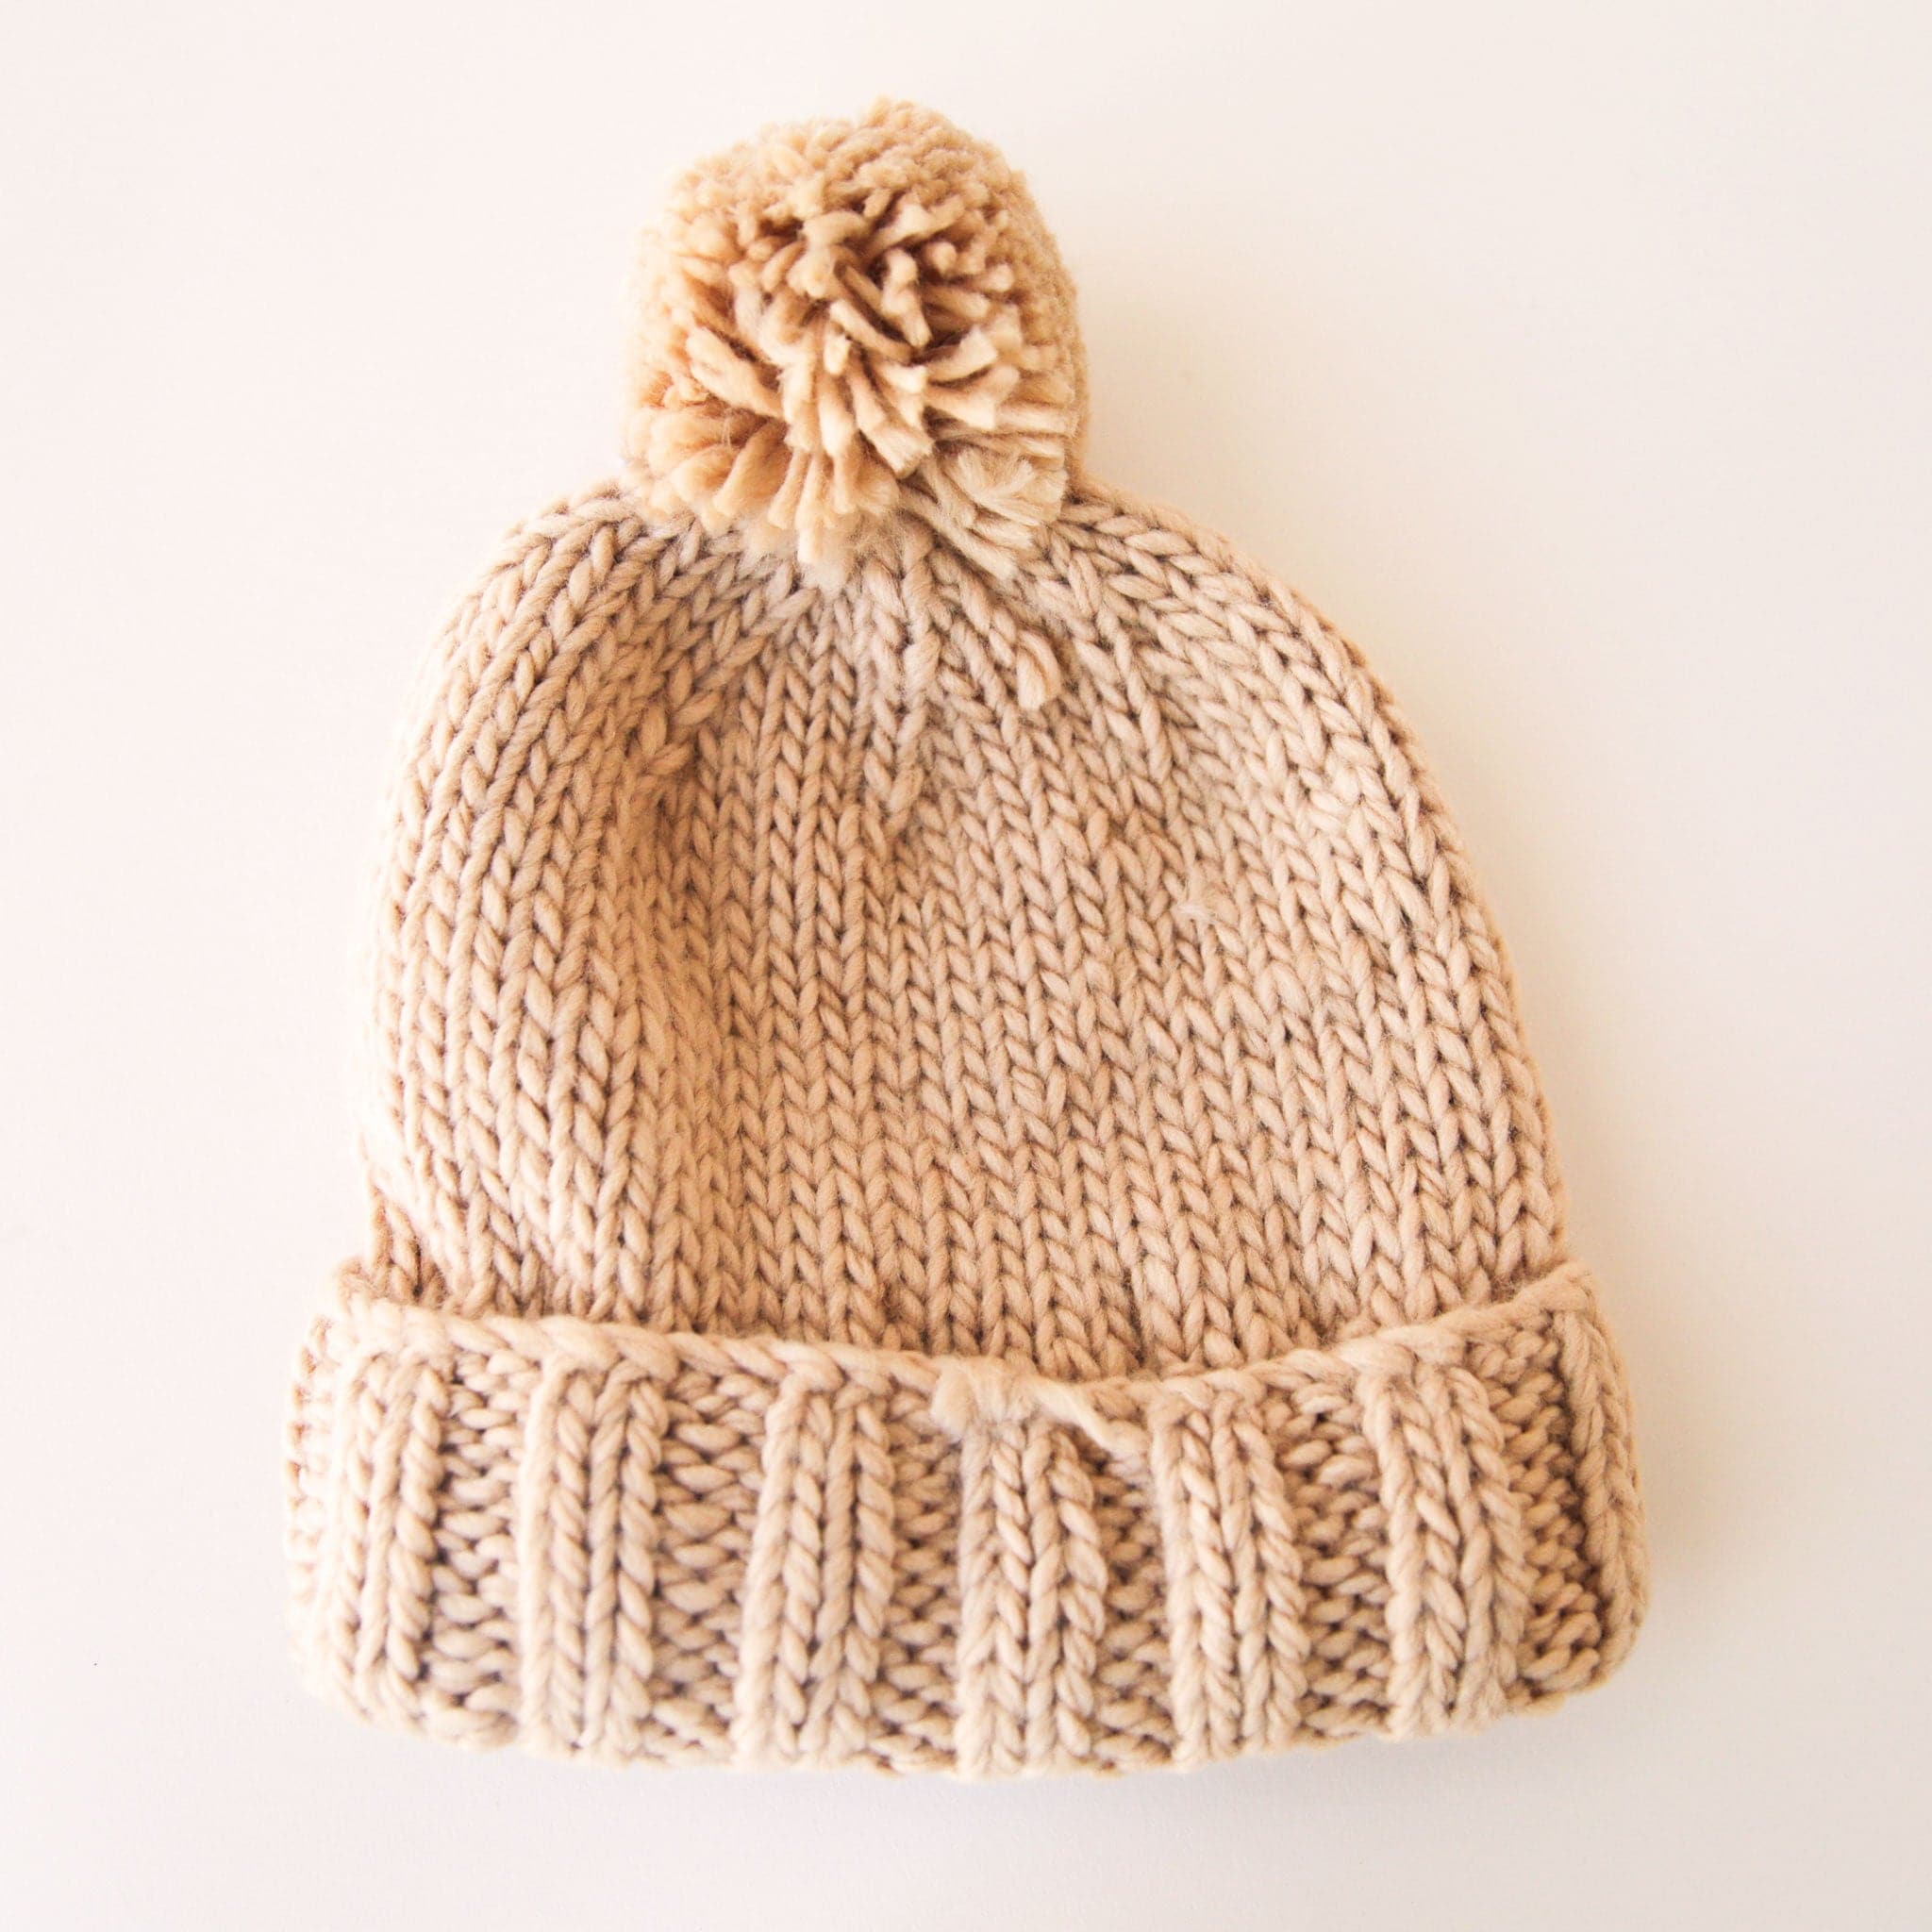 On a white background is a tan knit beanie with a pom pom on top.